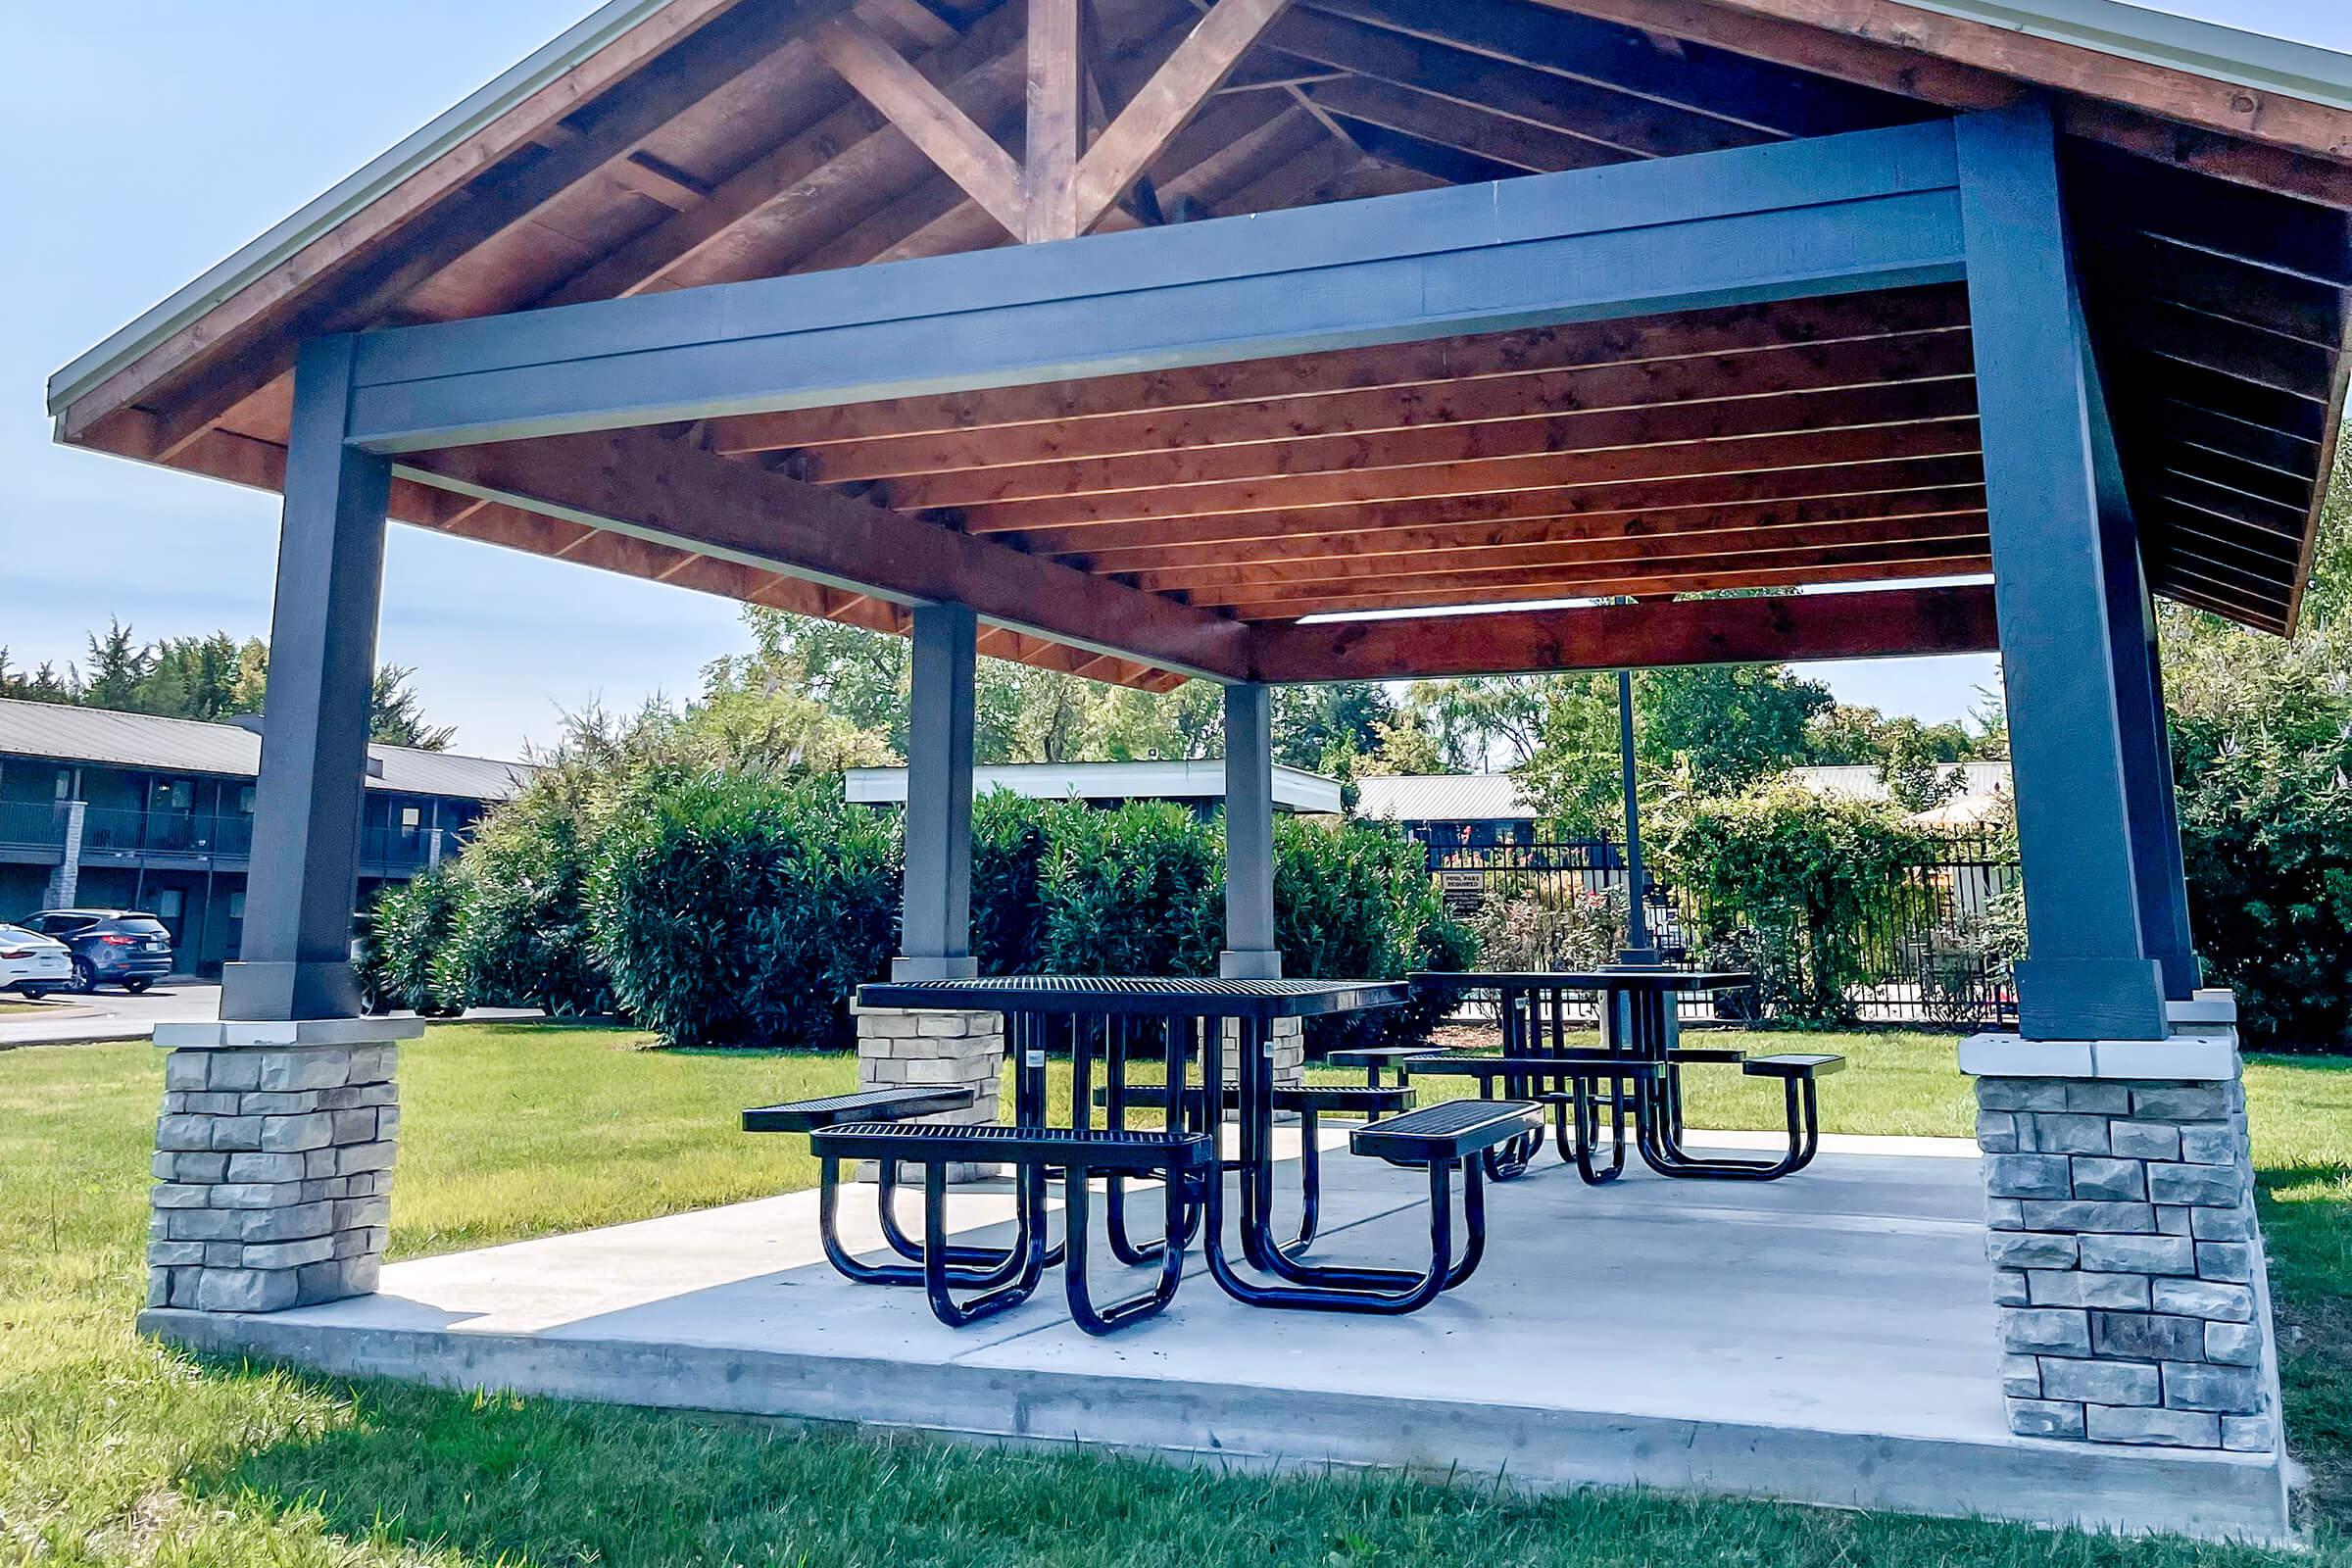 Picnic Area with Barbecue Grills